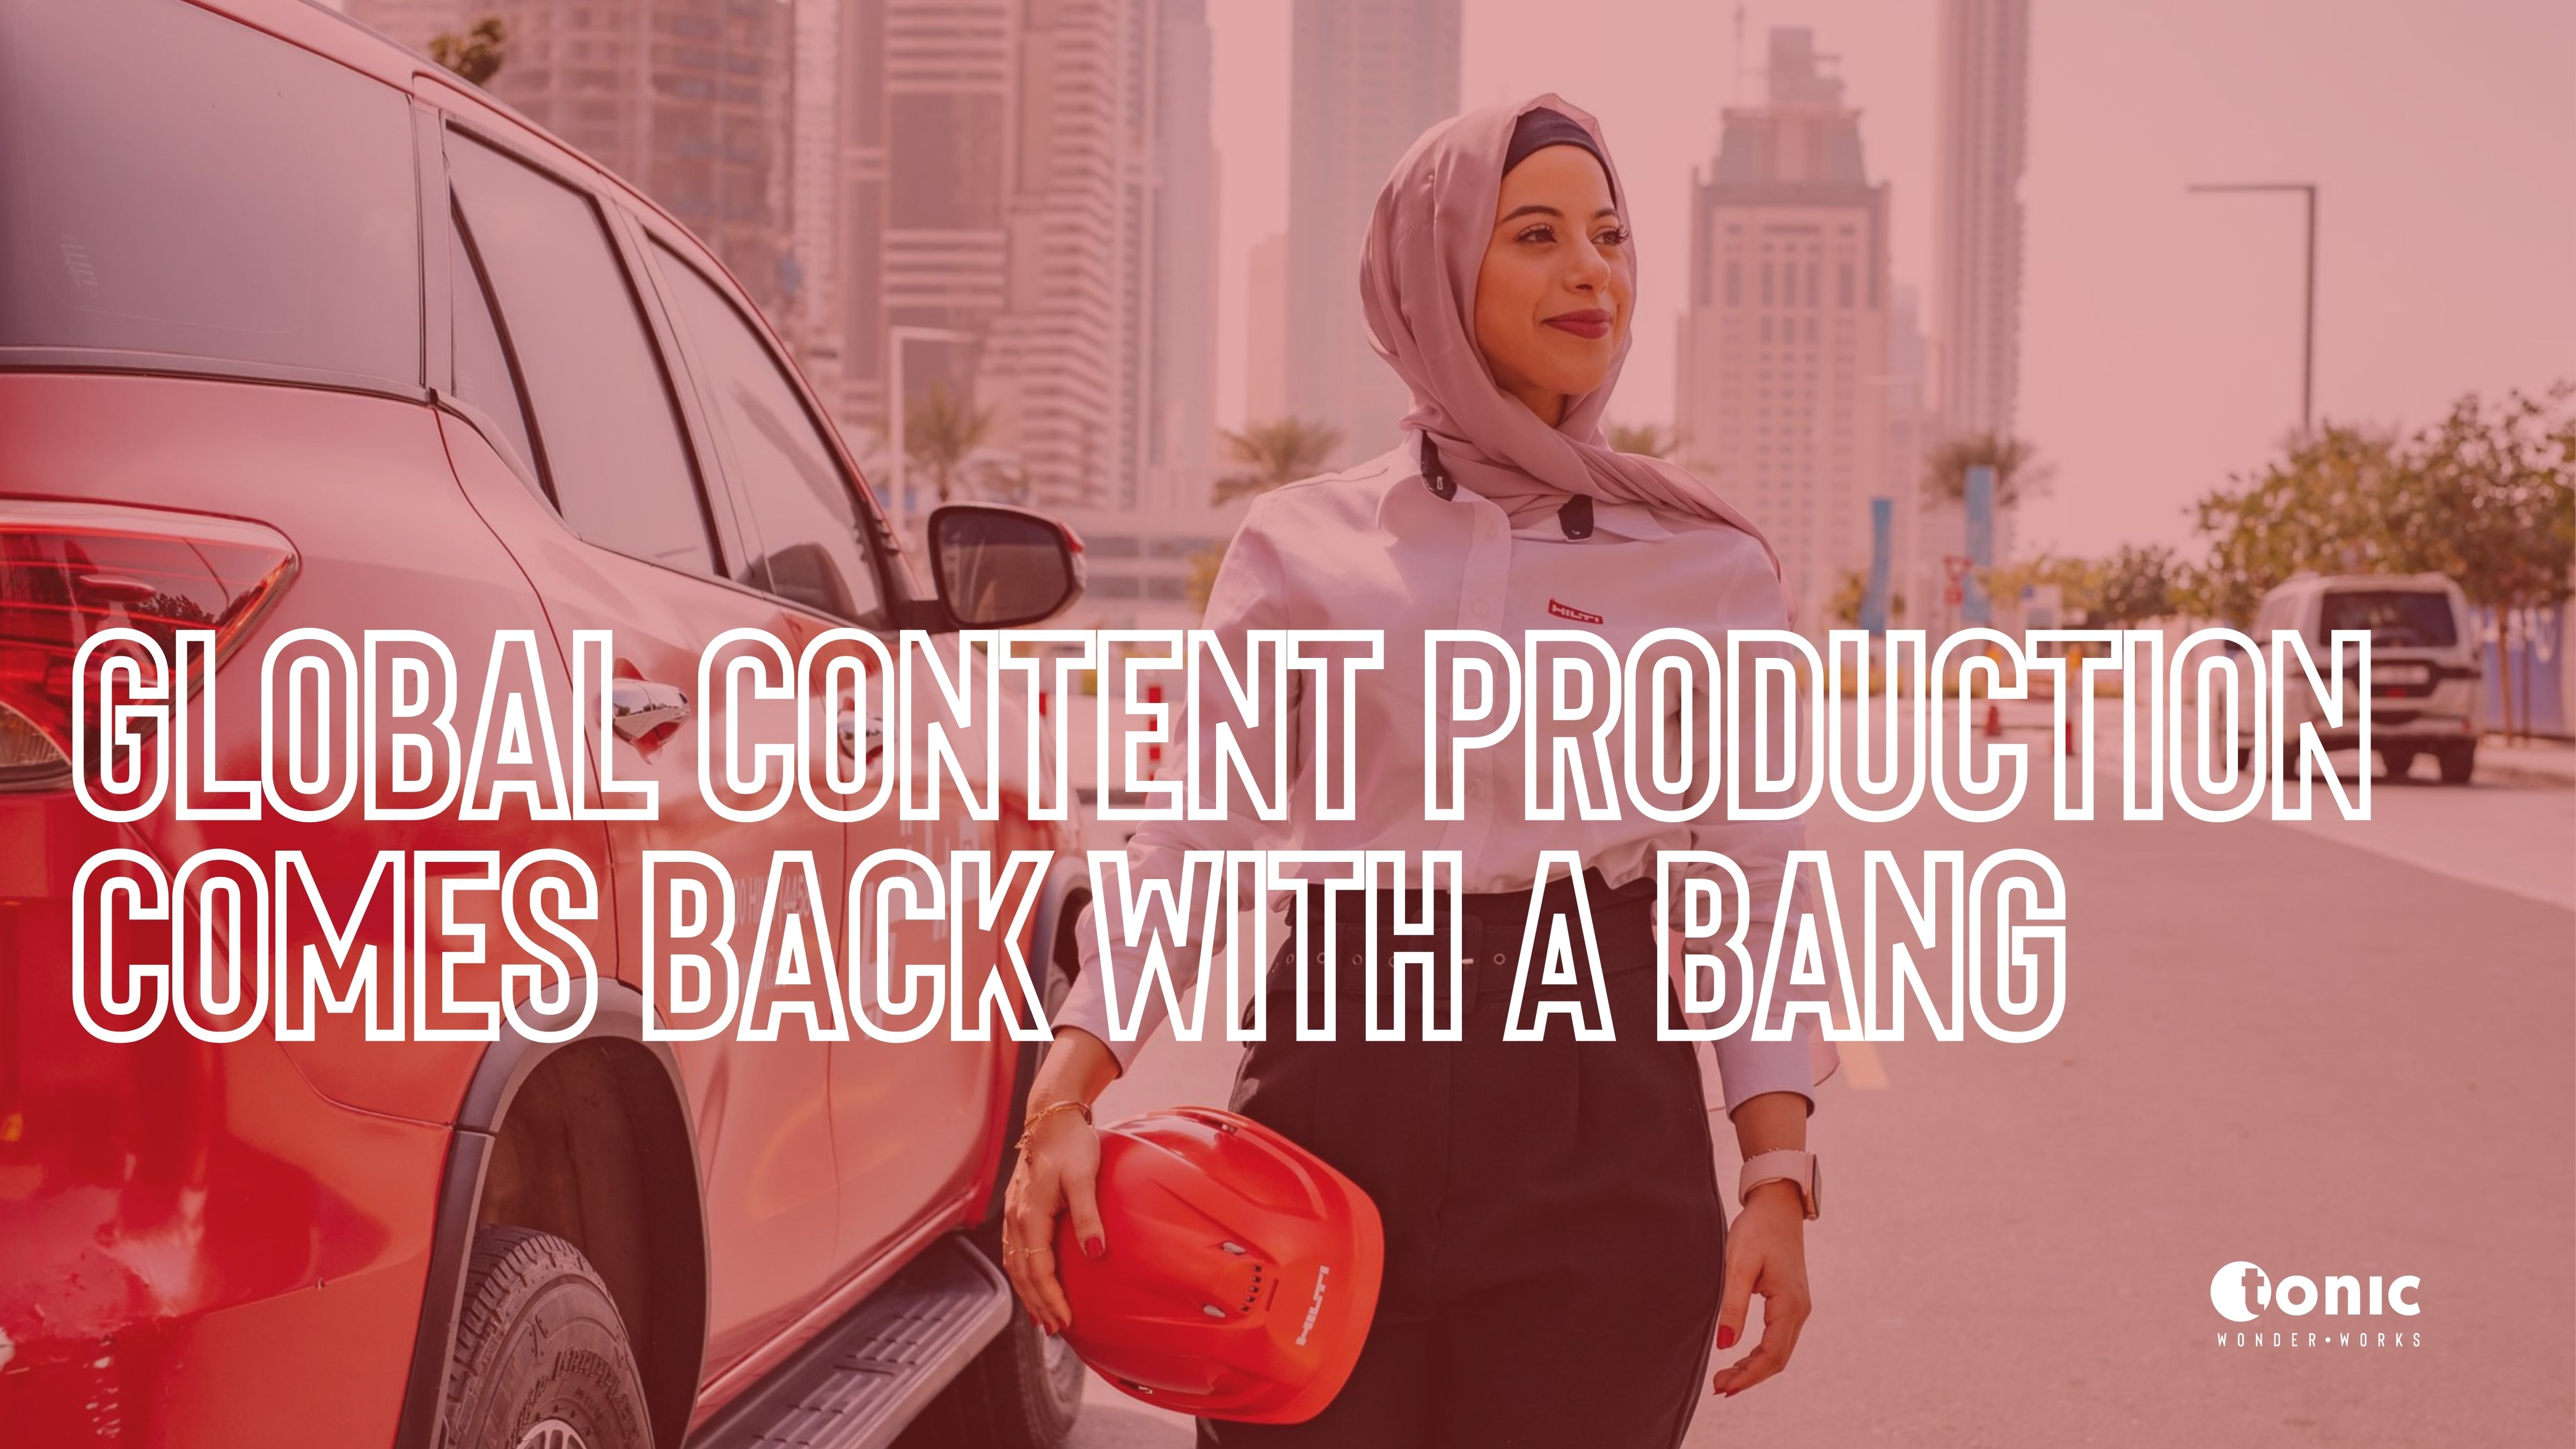 Global content production comes back with a bang